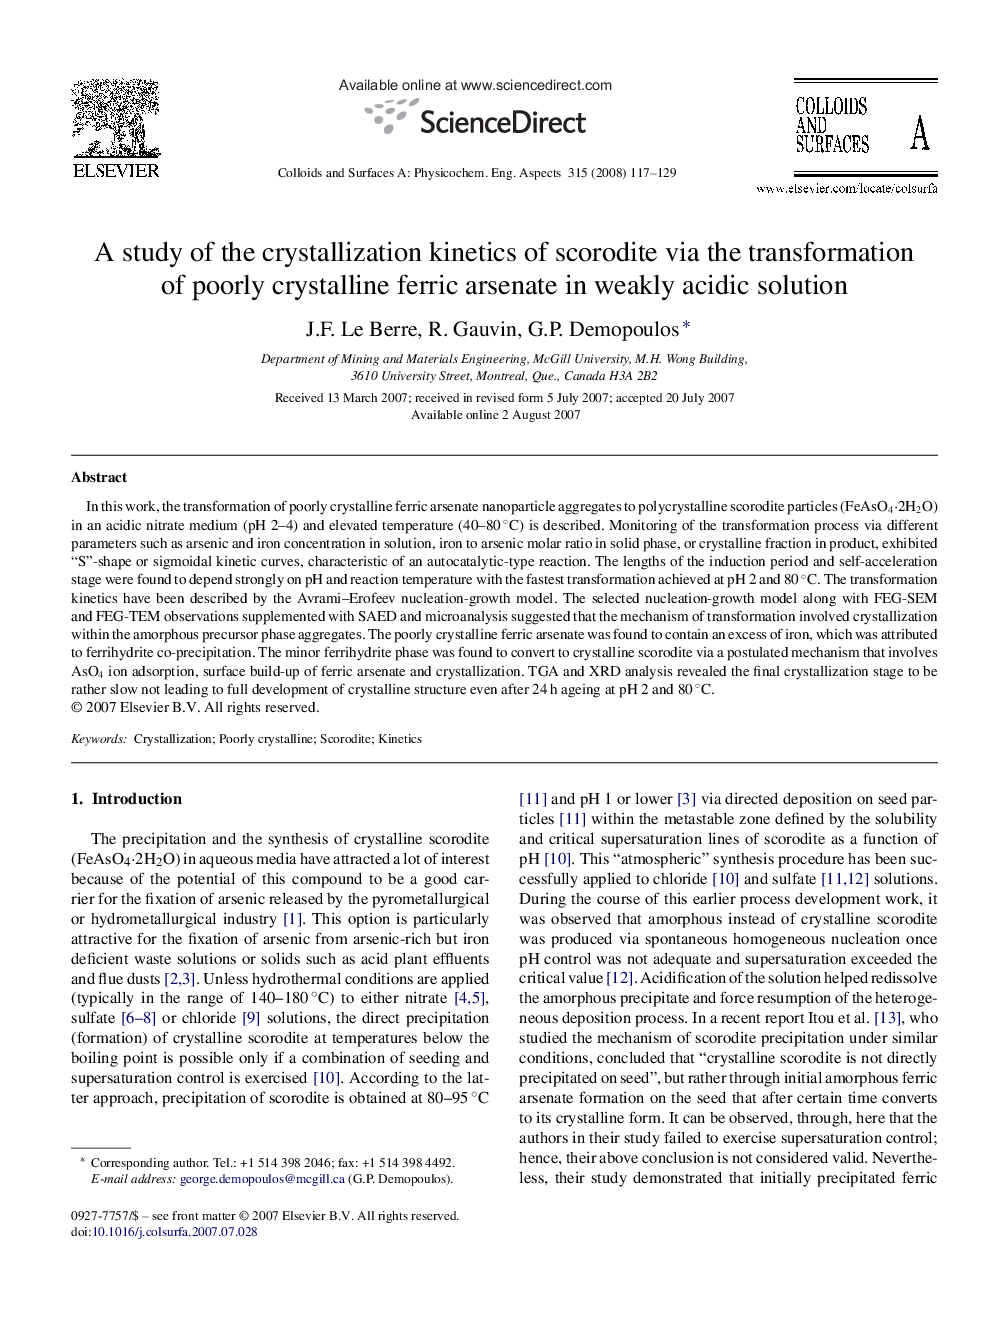 A study of the crystallization kinetics of scorodite via the transformation of poorly crystalline ferric arsenate in weakly acidic solution